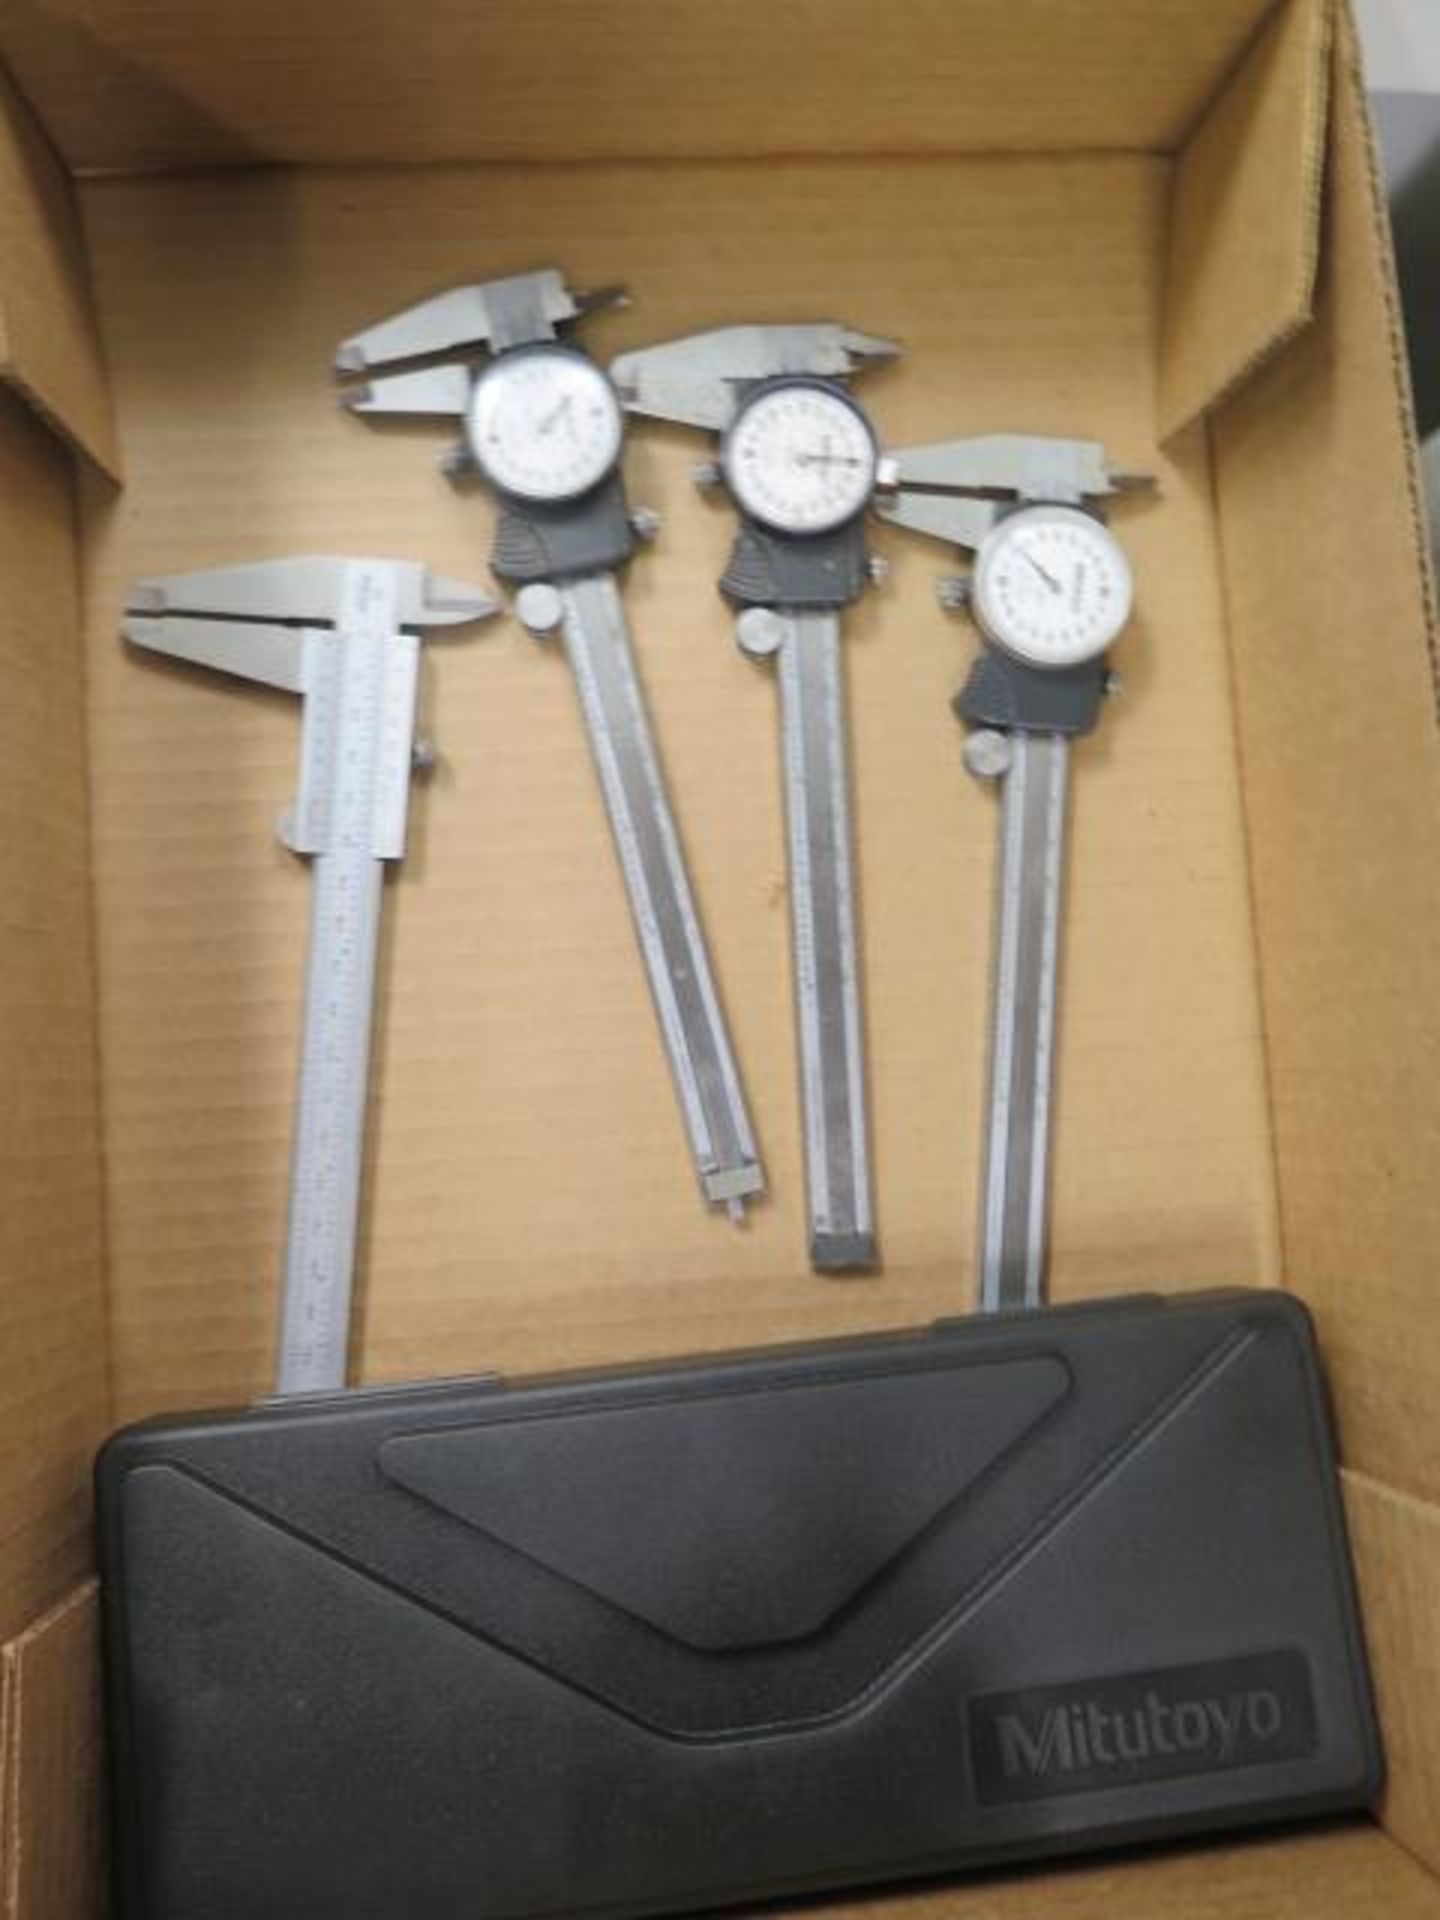 Mitutoyo 6" Dial Calipers (4) and 8" Vernier Caliper (SOLD AS-IS - NO WARRANTY) - Image 2 of 4